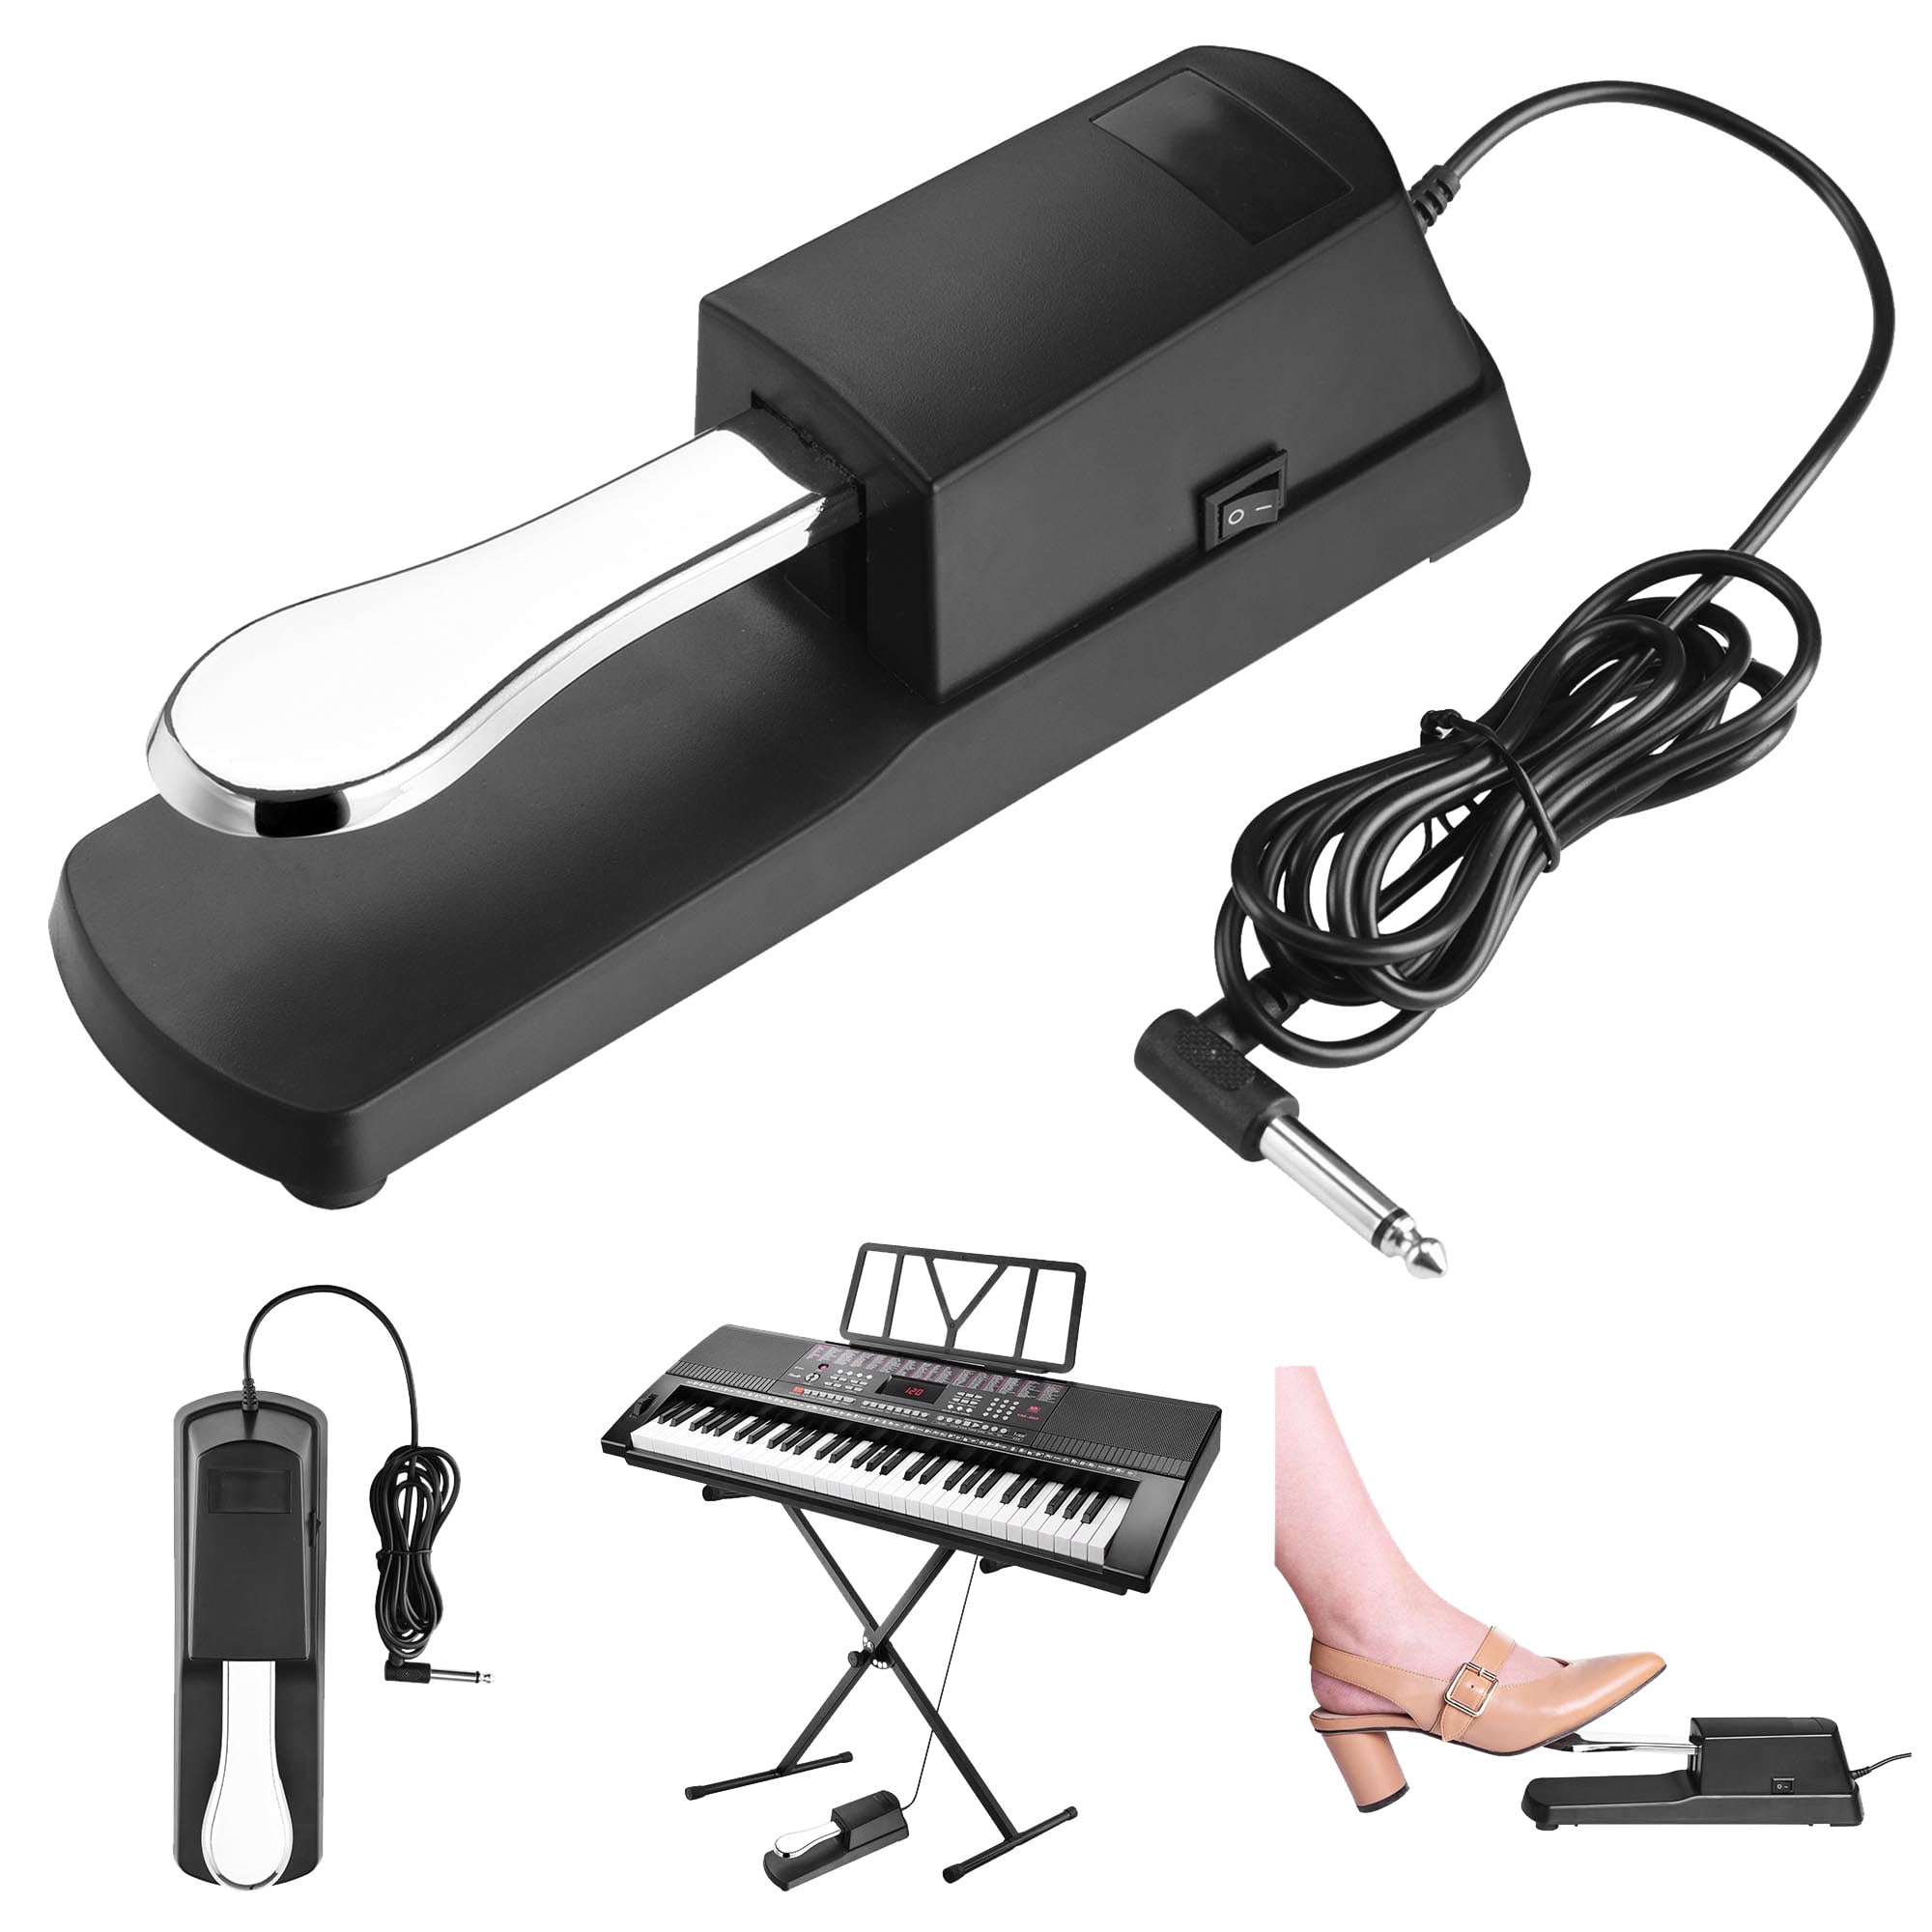 Live Wire Solutions LWS250 Universal Keyboard Sustain Pedal. - (7)